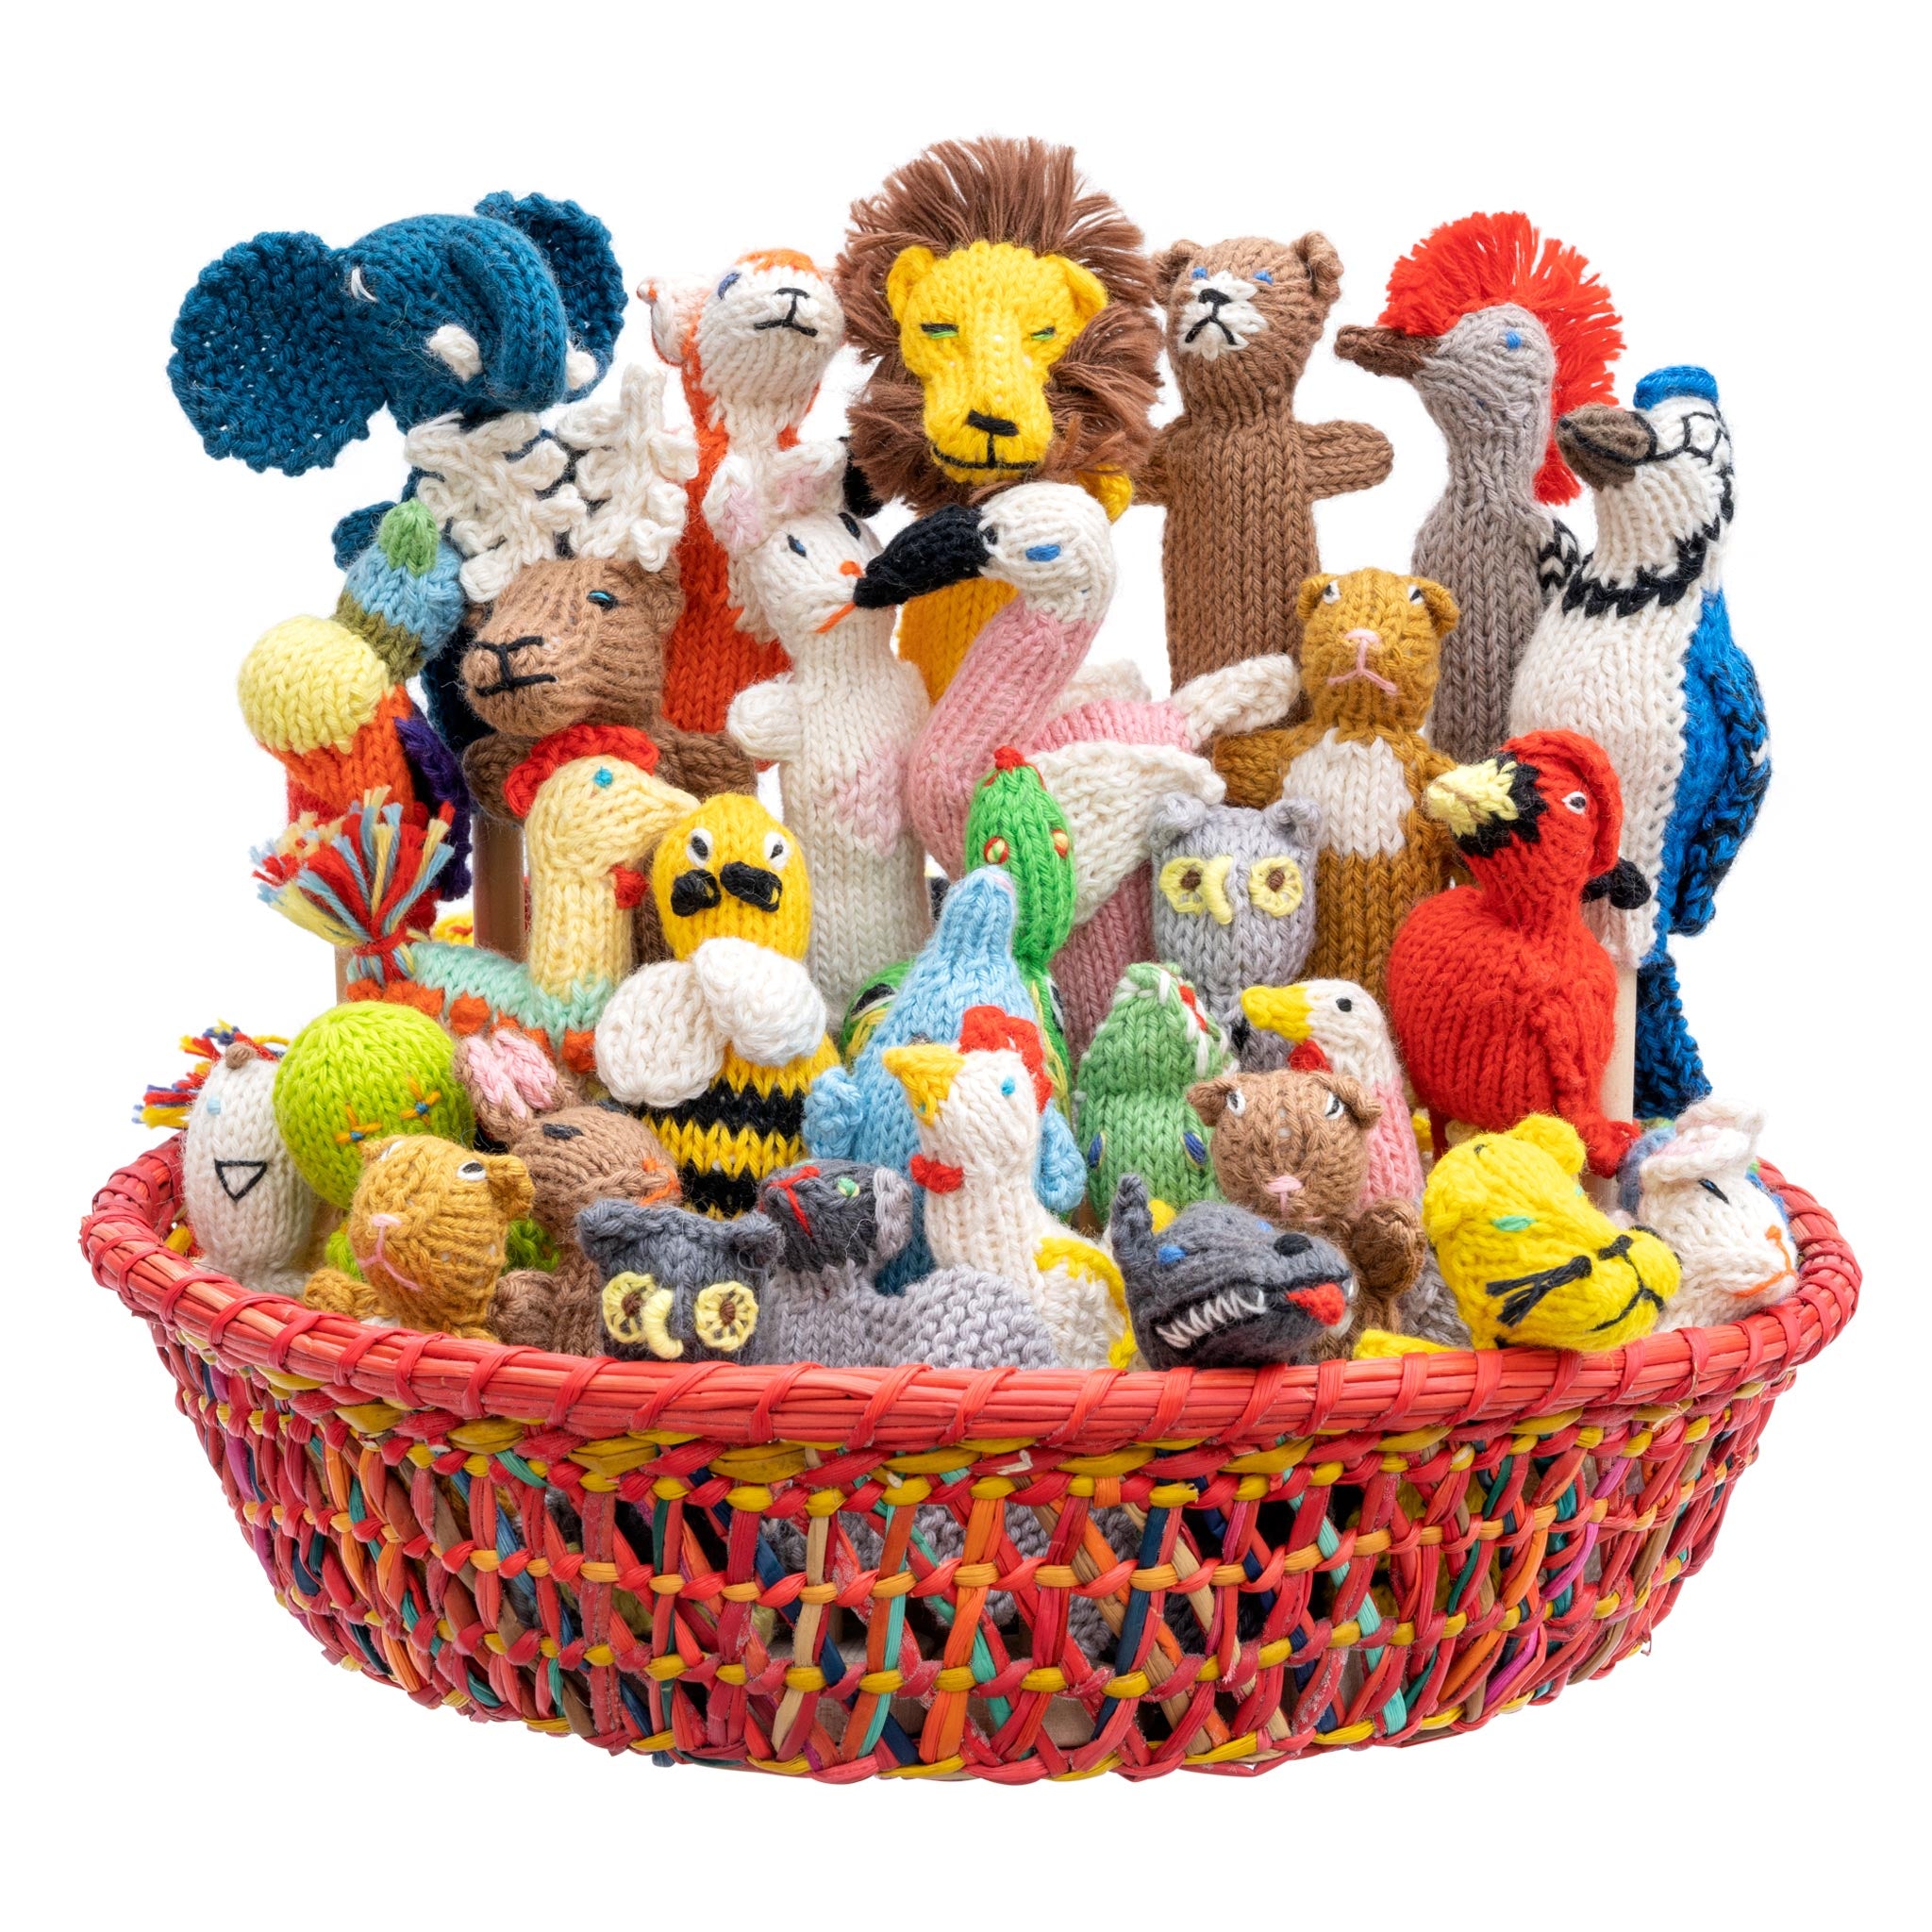 The Puppet Company - Knitted Puppets -Humphrey Hand Puppet [Toy]